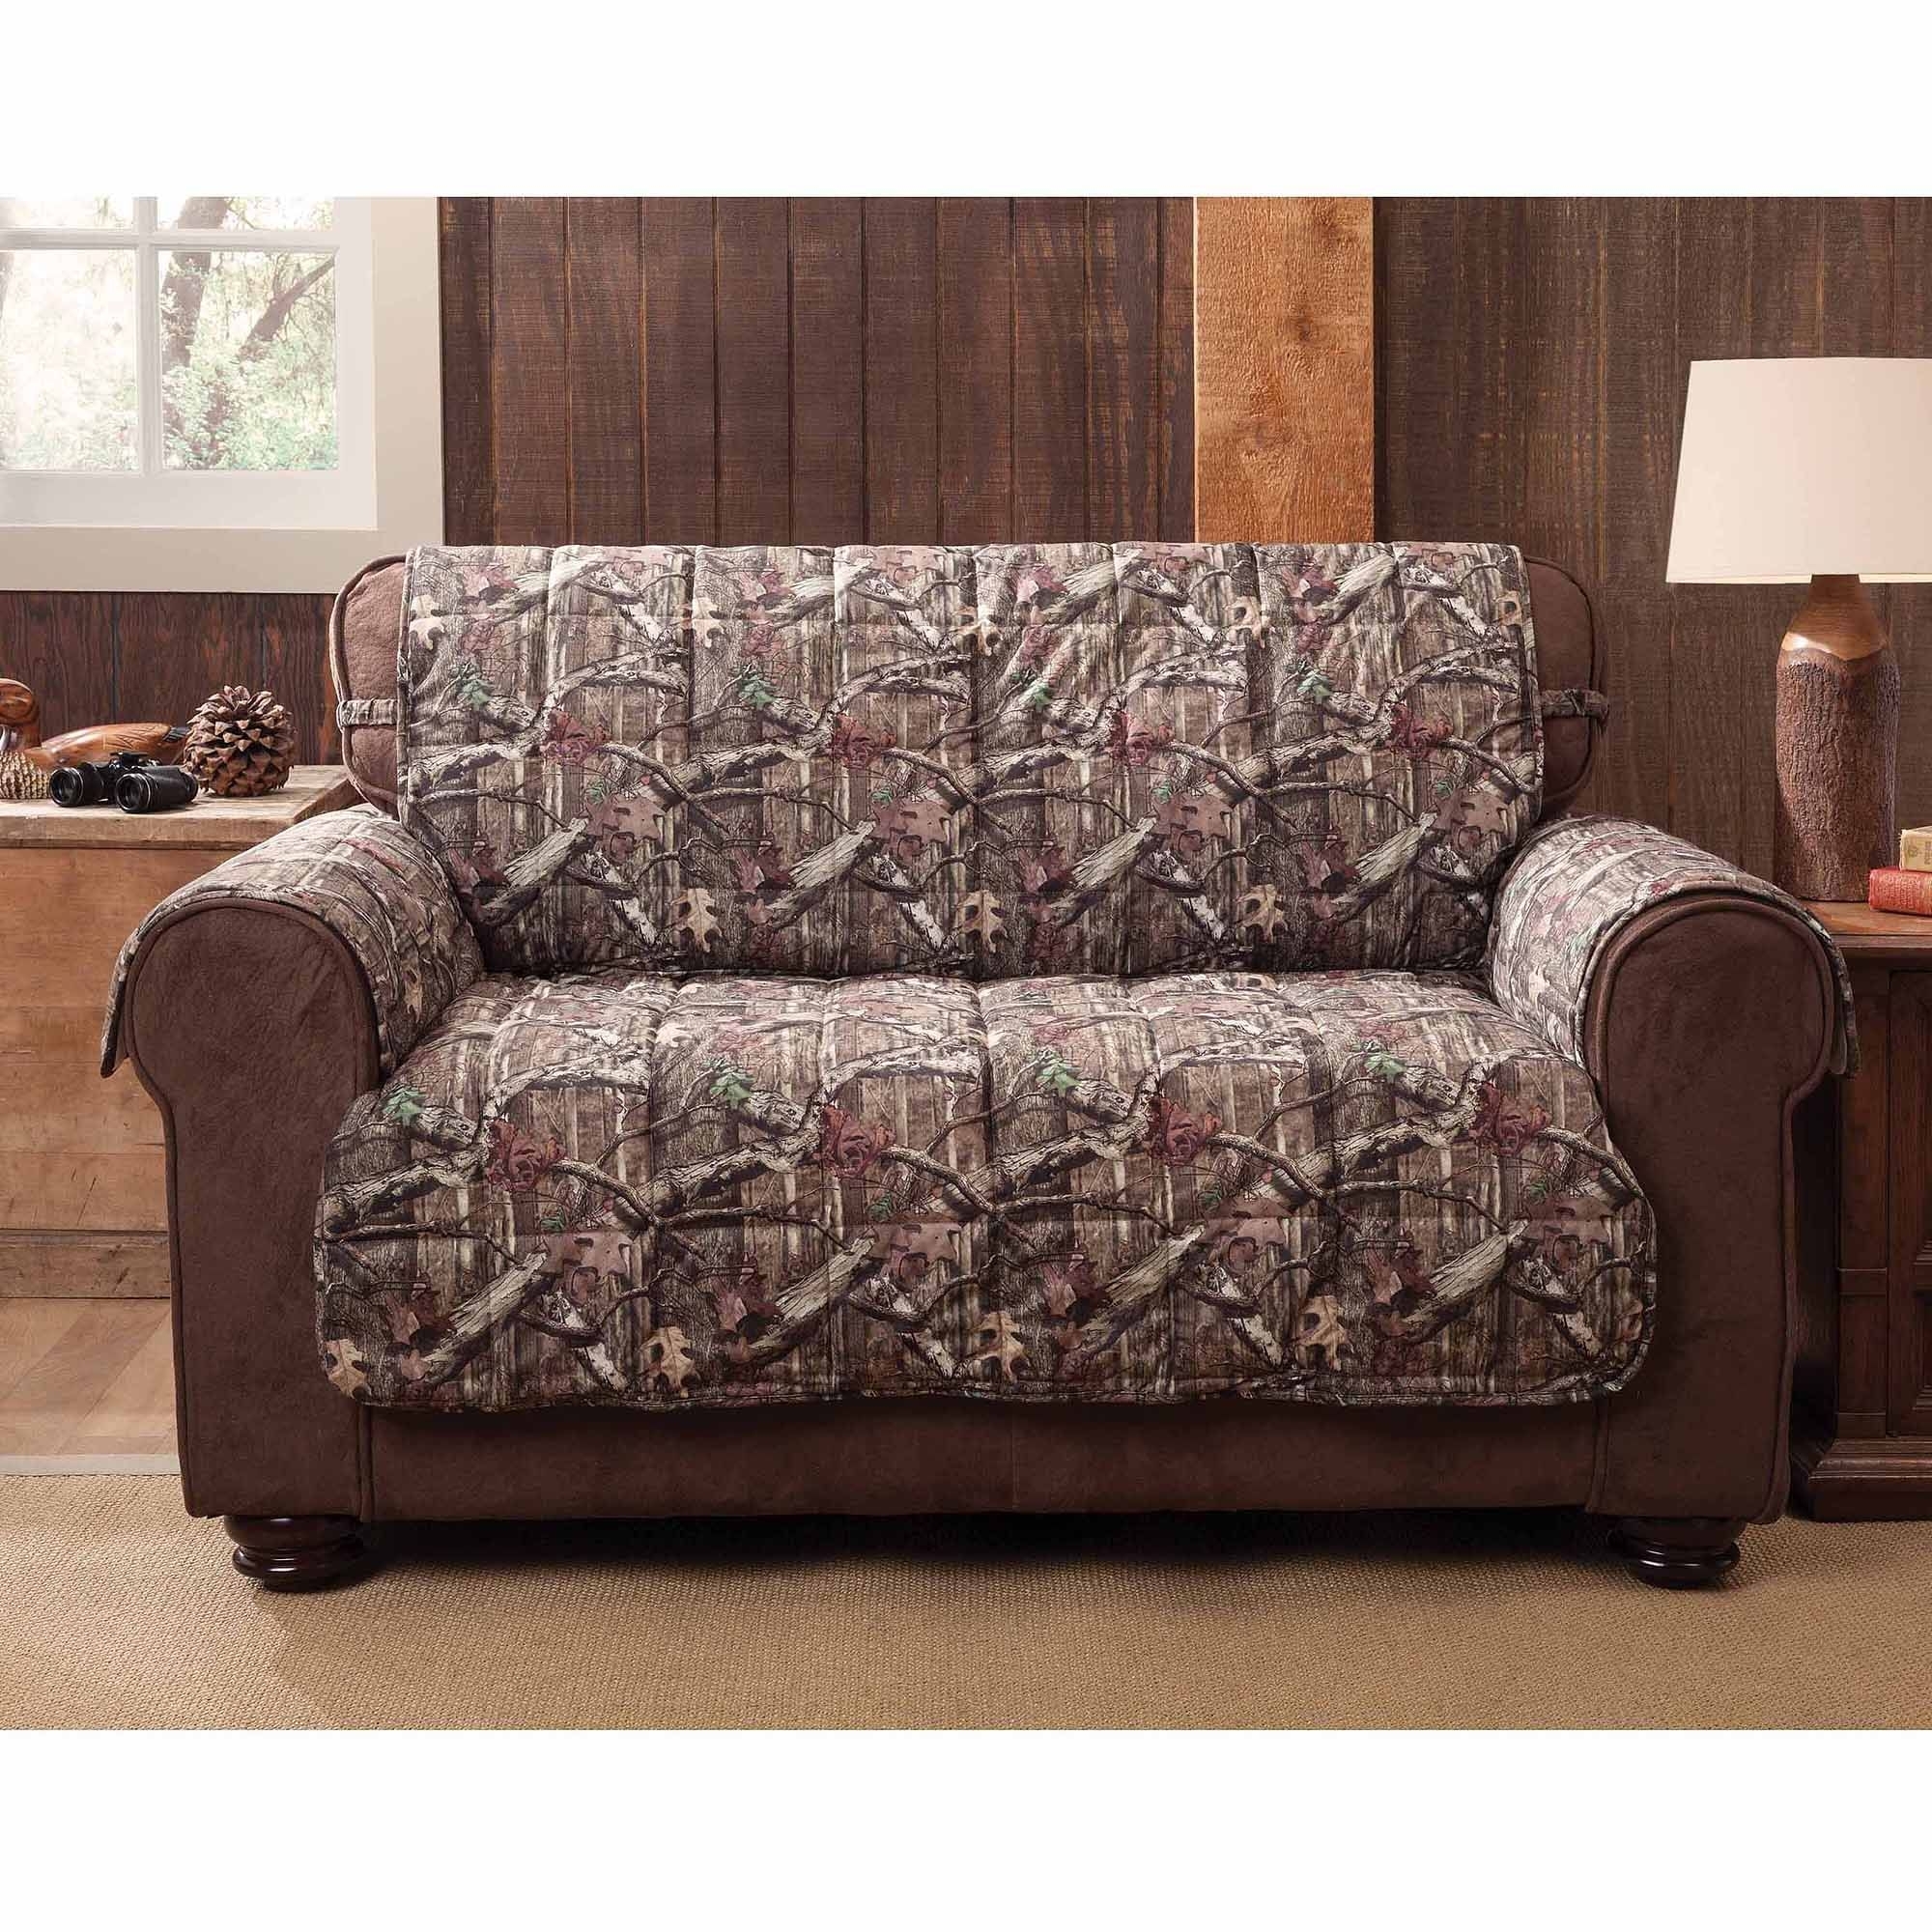 https://foter.com/photos/title/camo-couch-covers.jpg